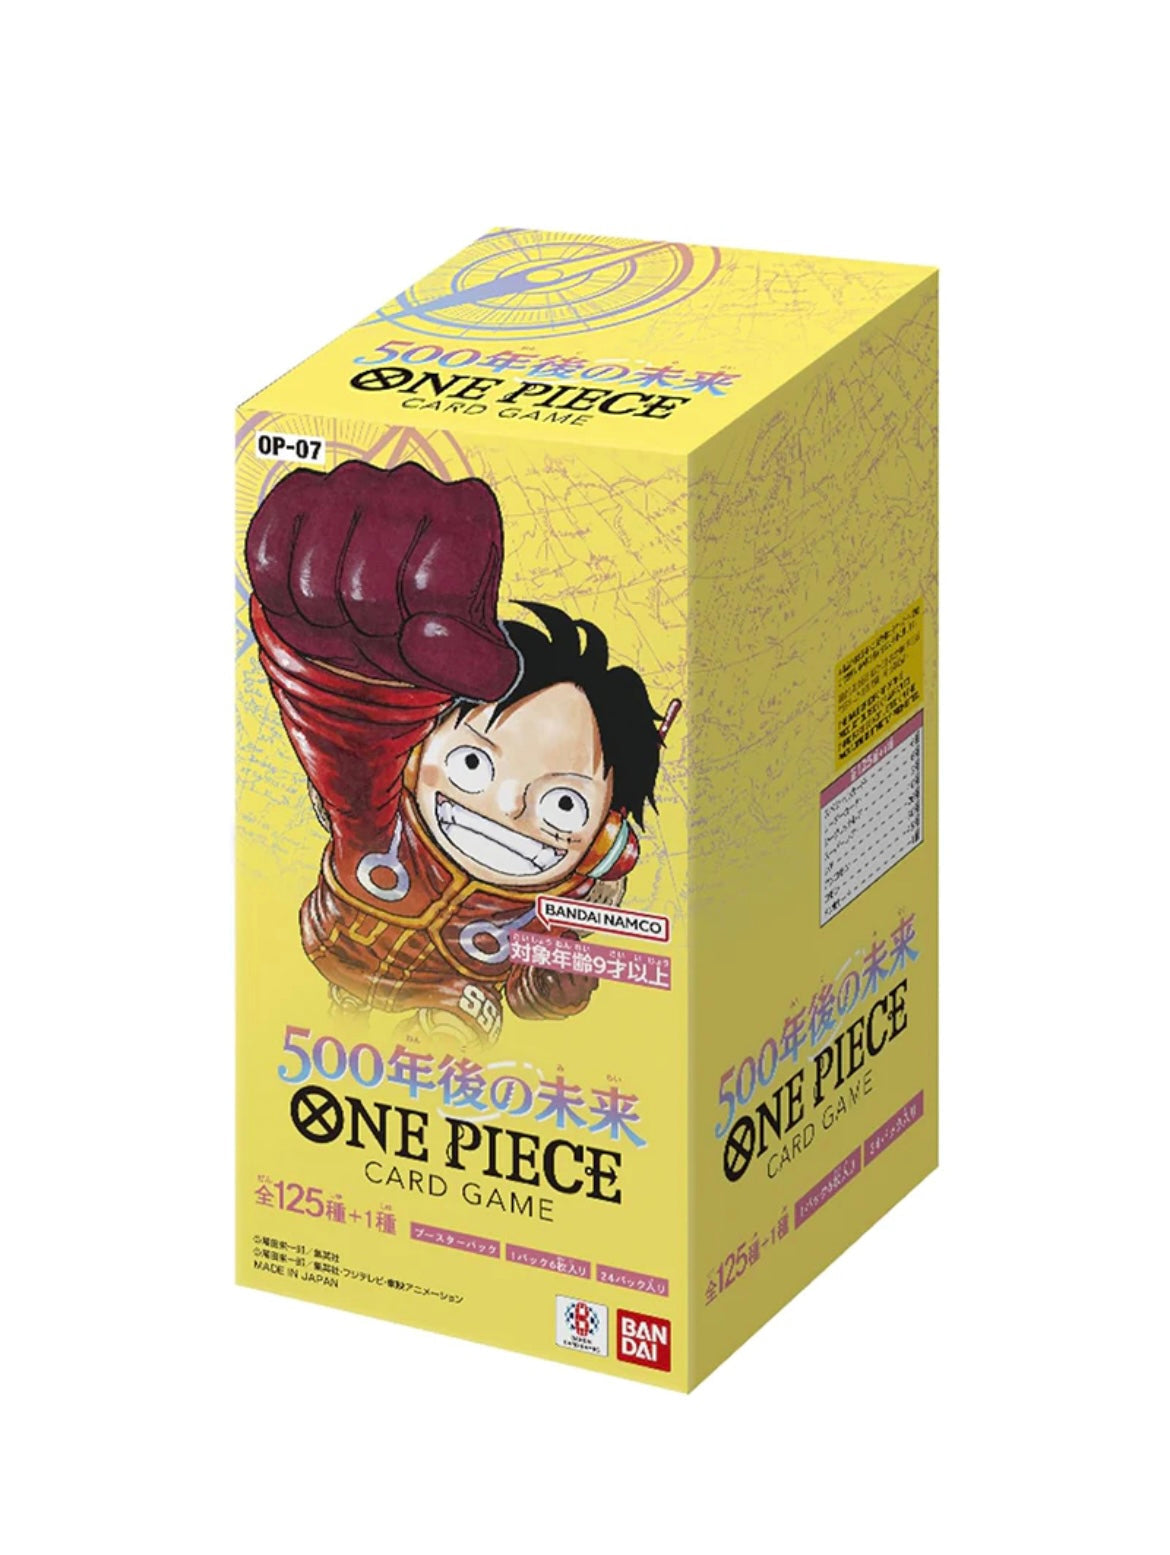 One Piece Trading Card Game Op-07 500 Years into the Future Japanese Booster Box